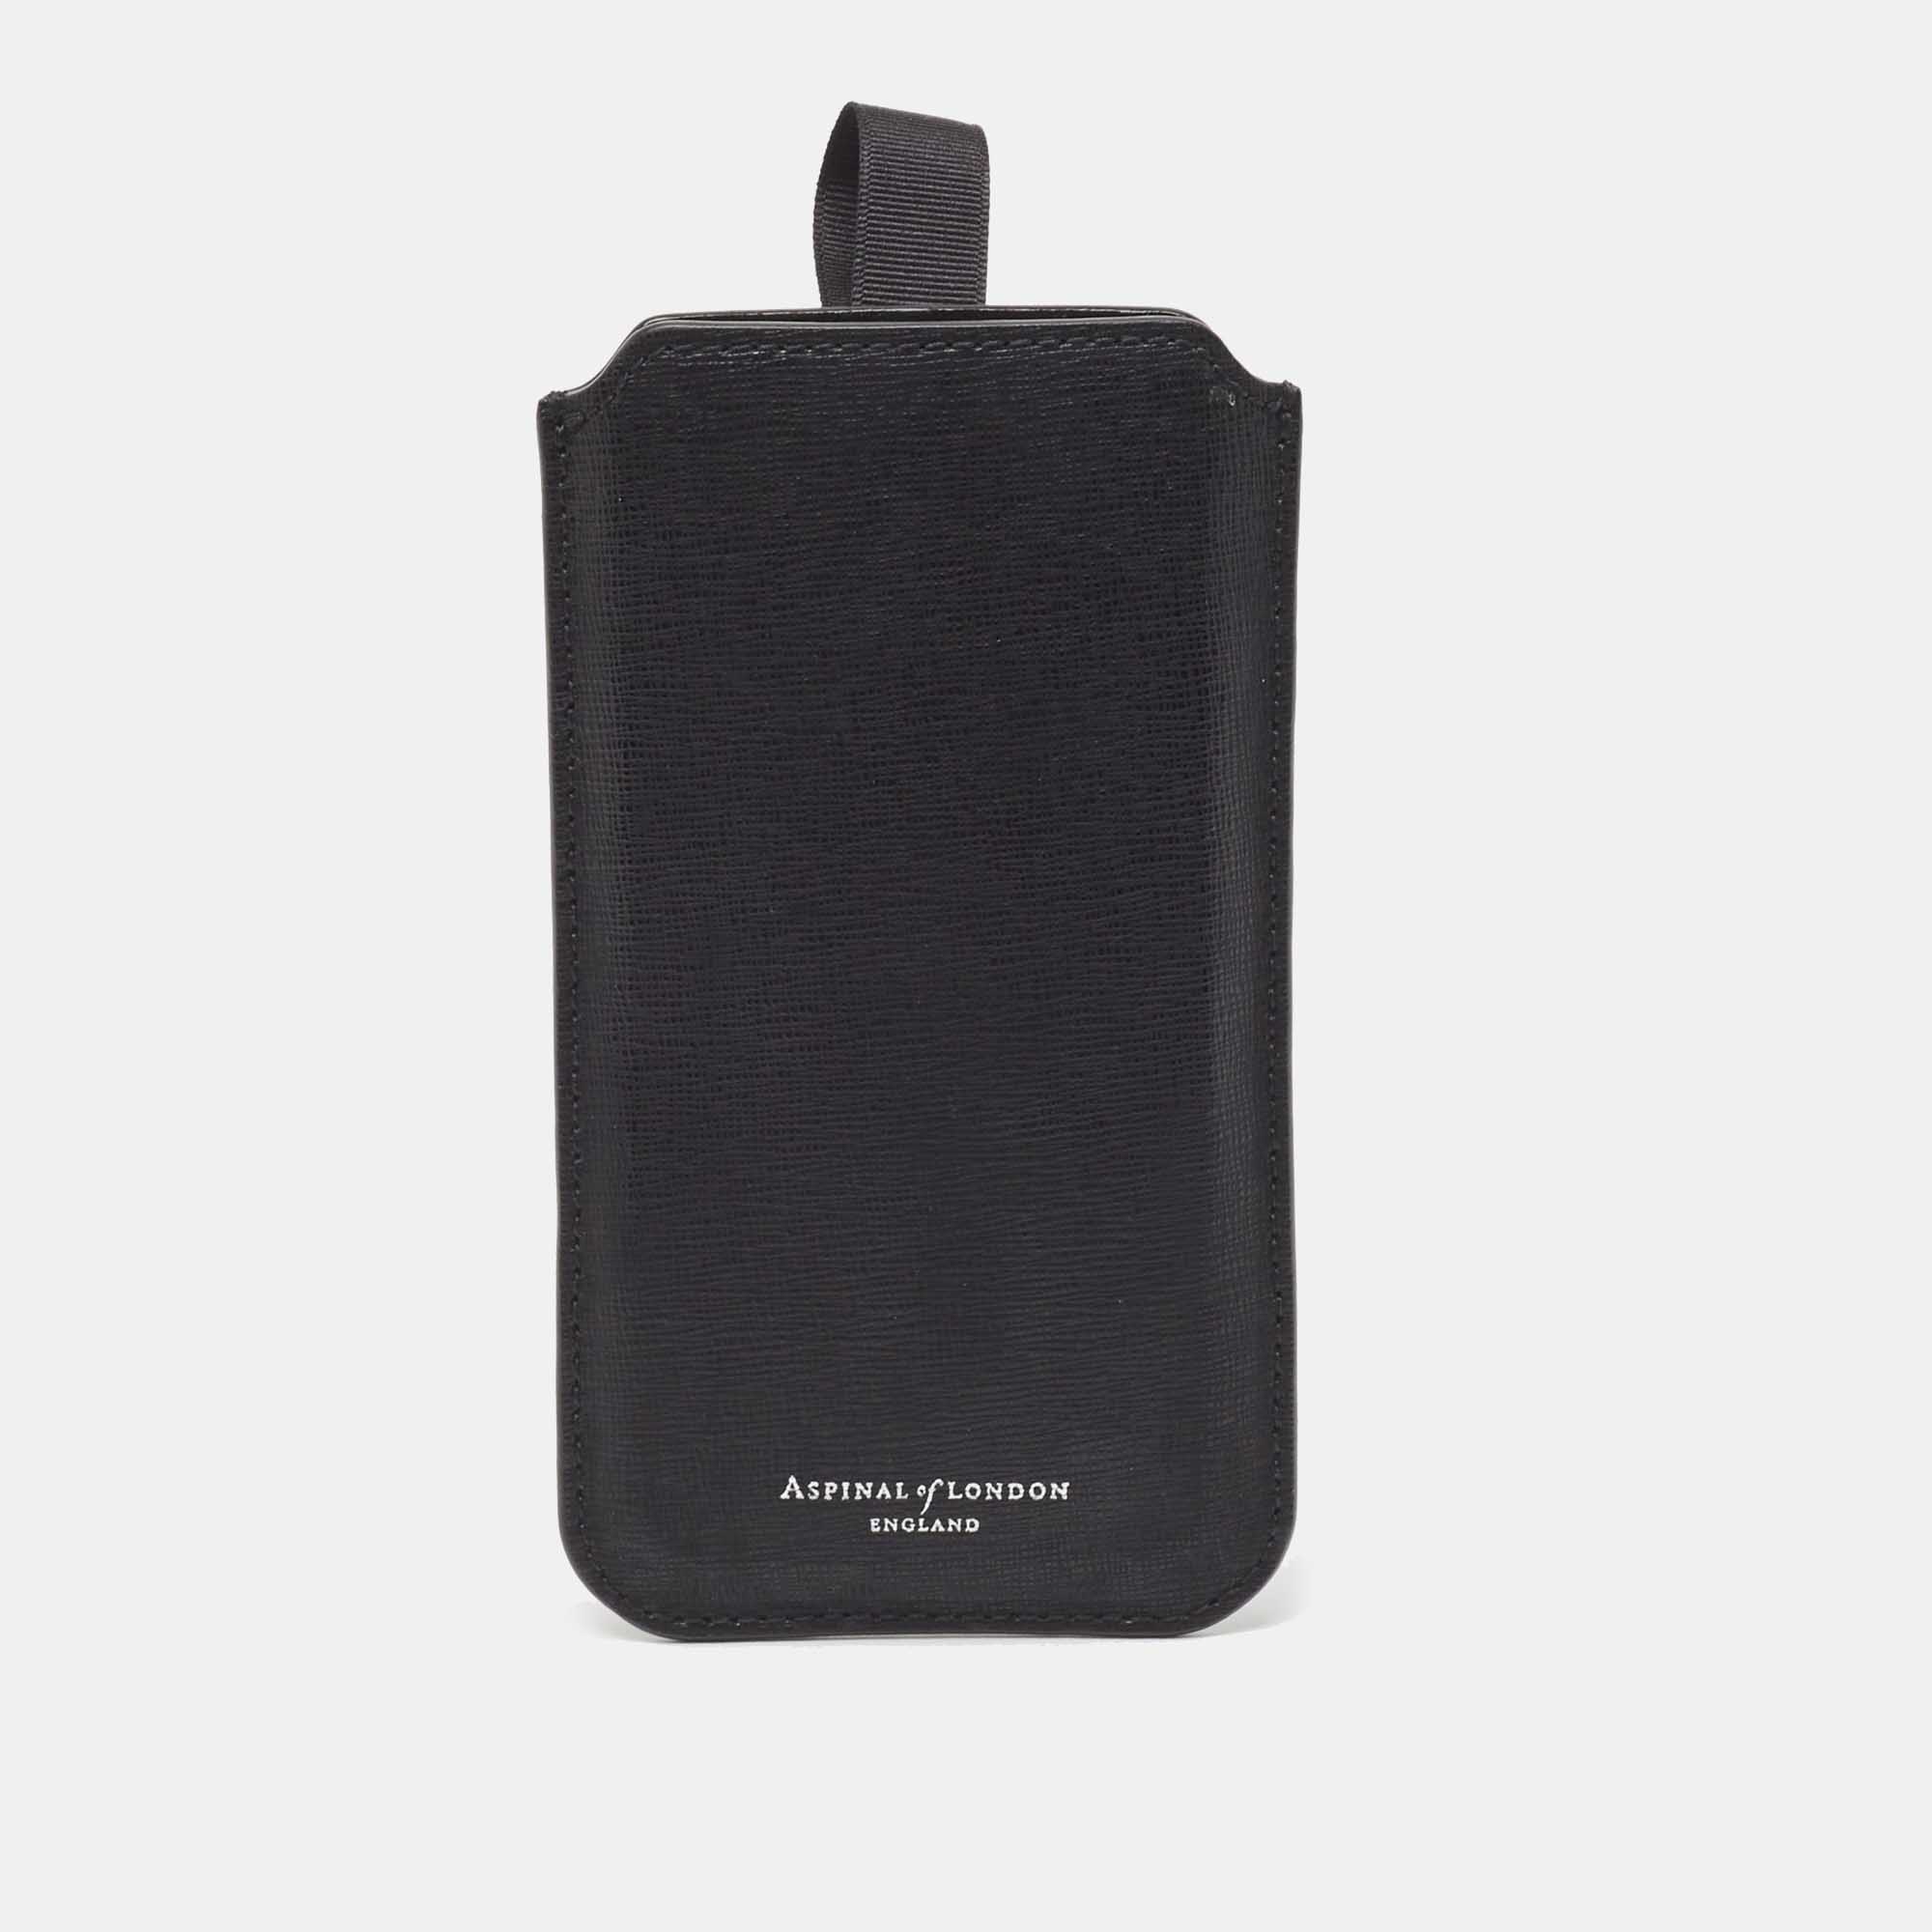 aspinal of london black leather phone case